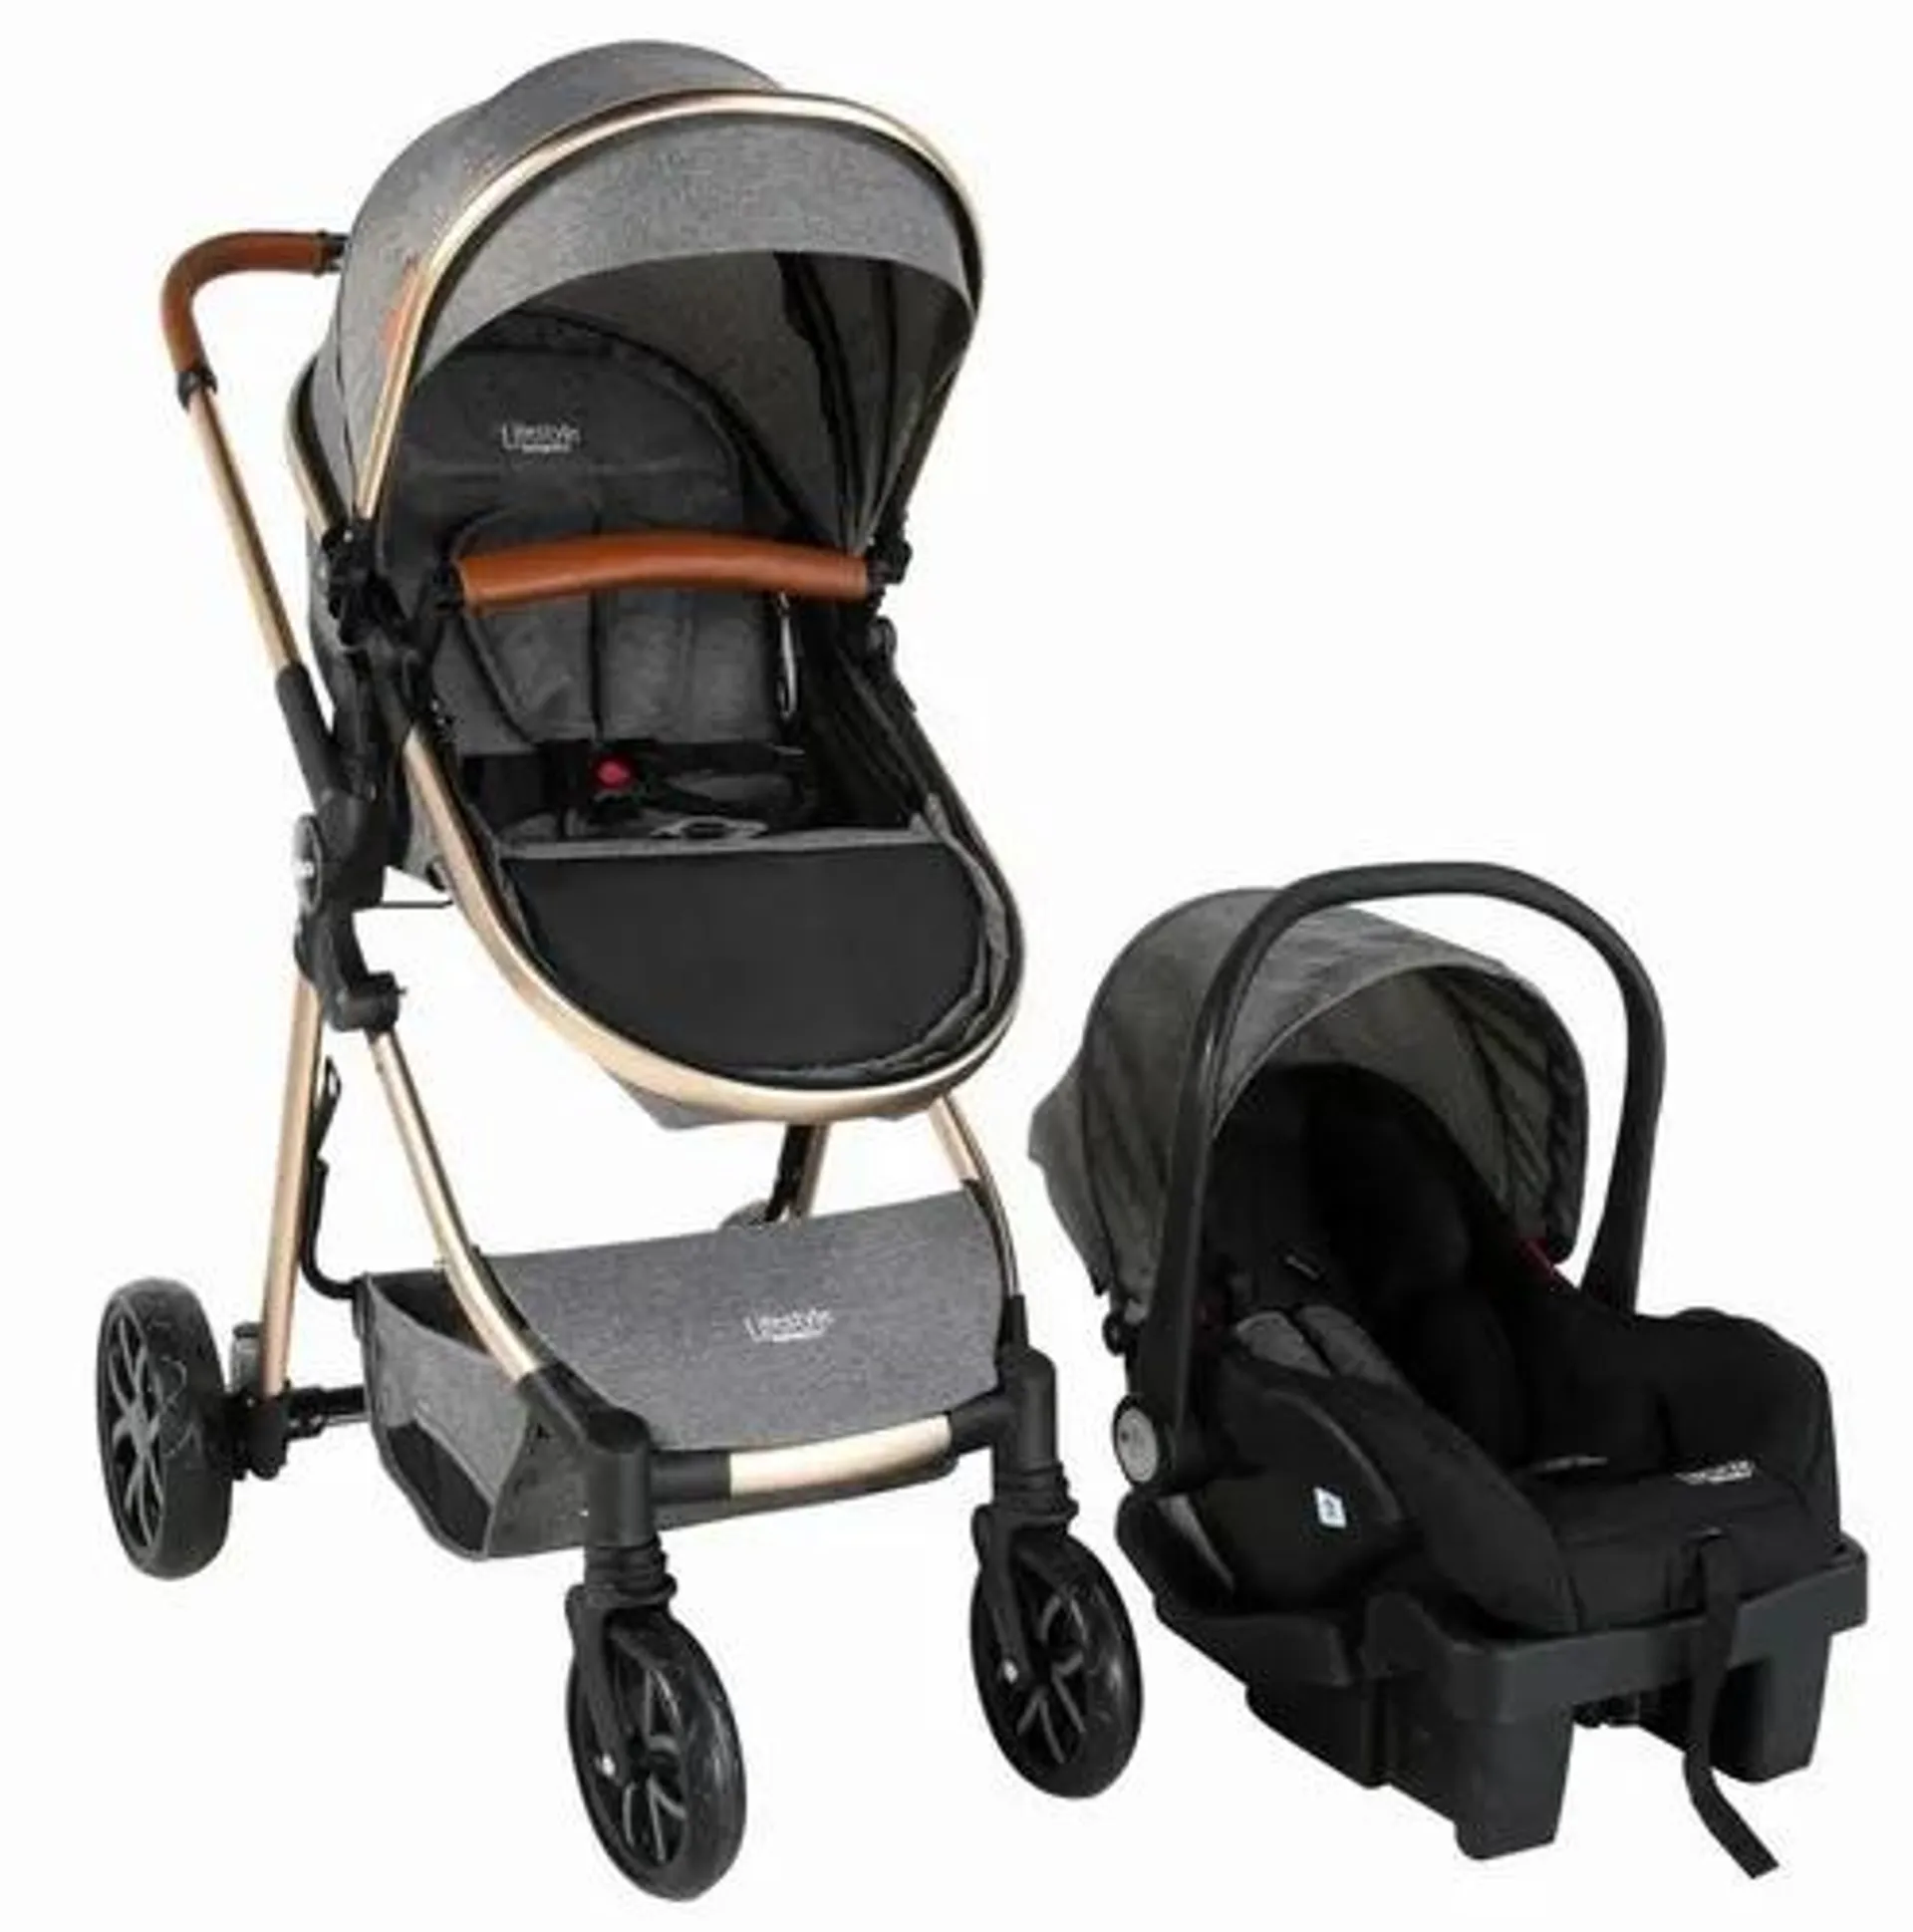 CARRIOLA Travel system Gray